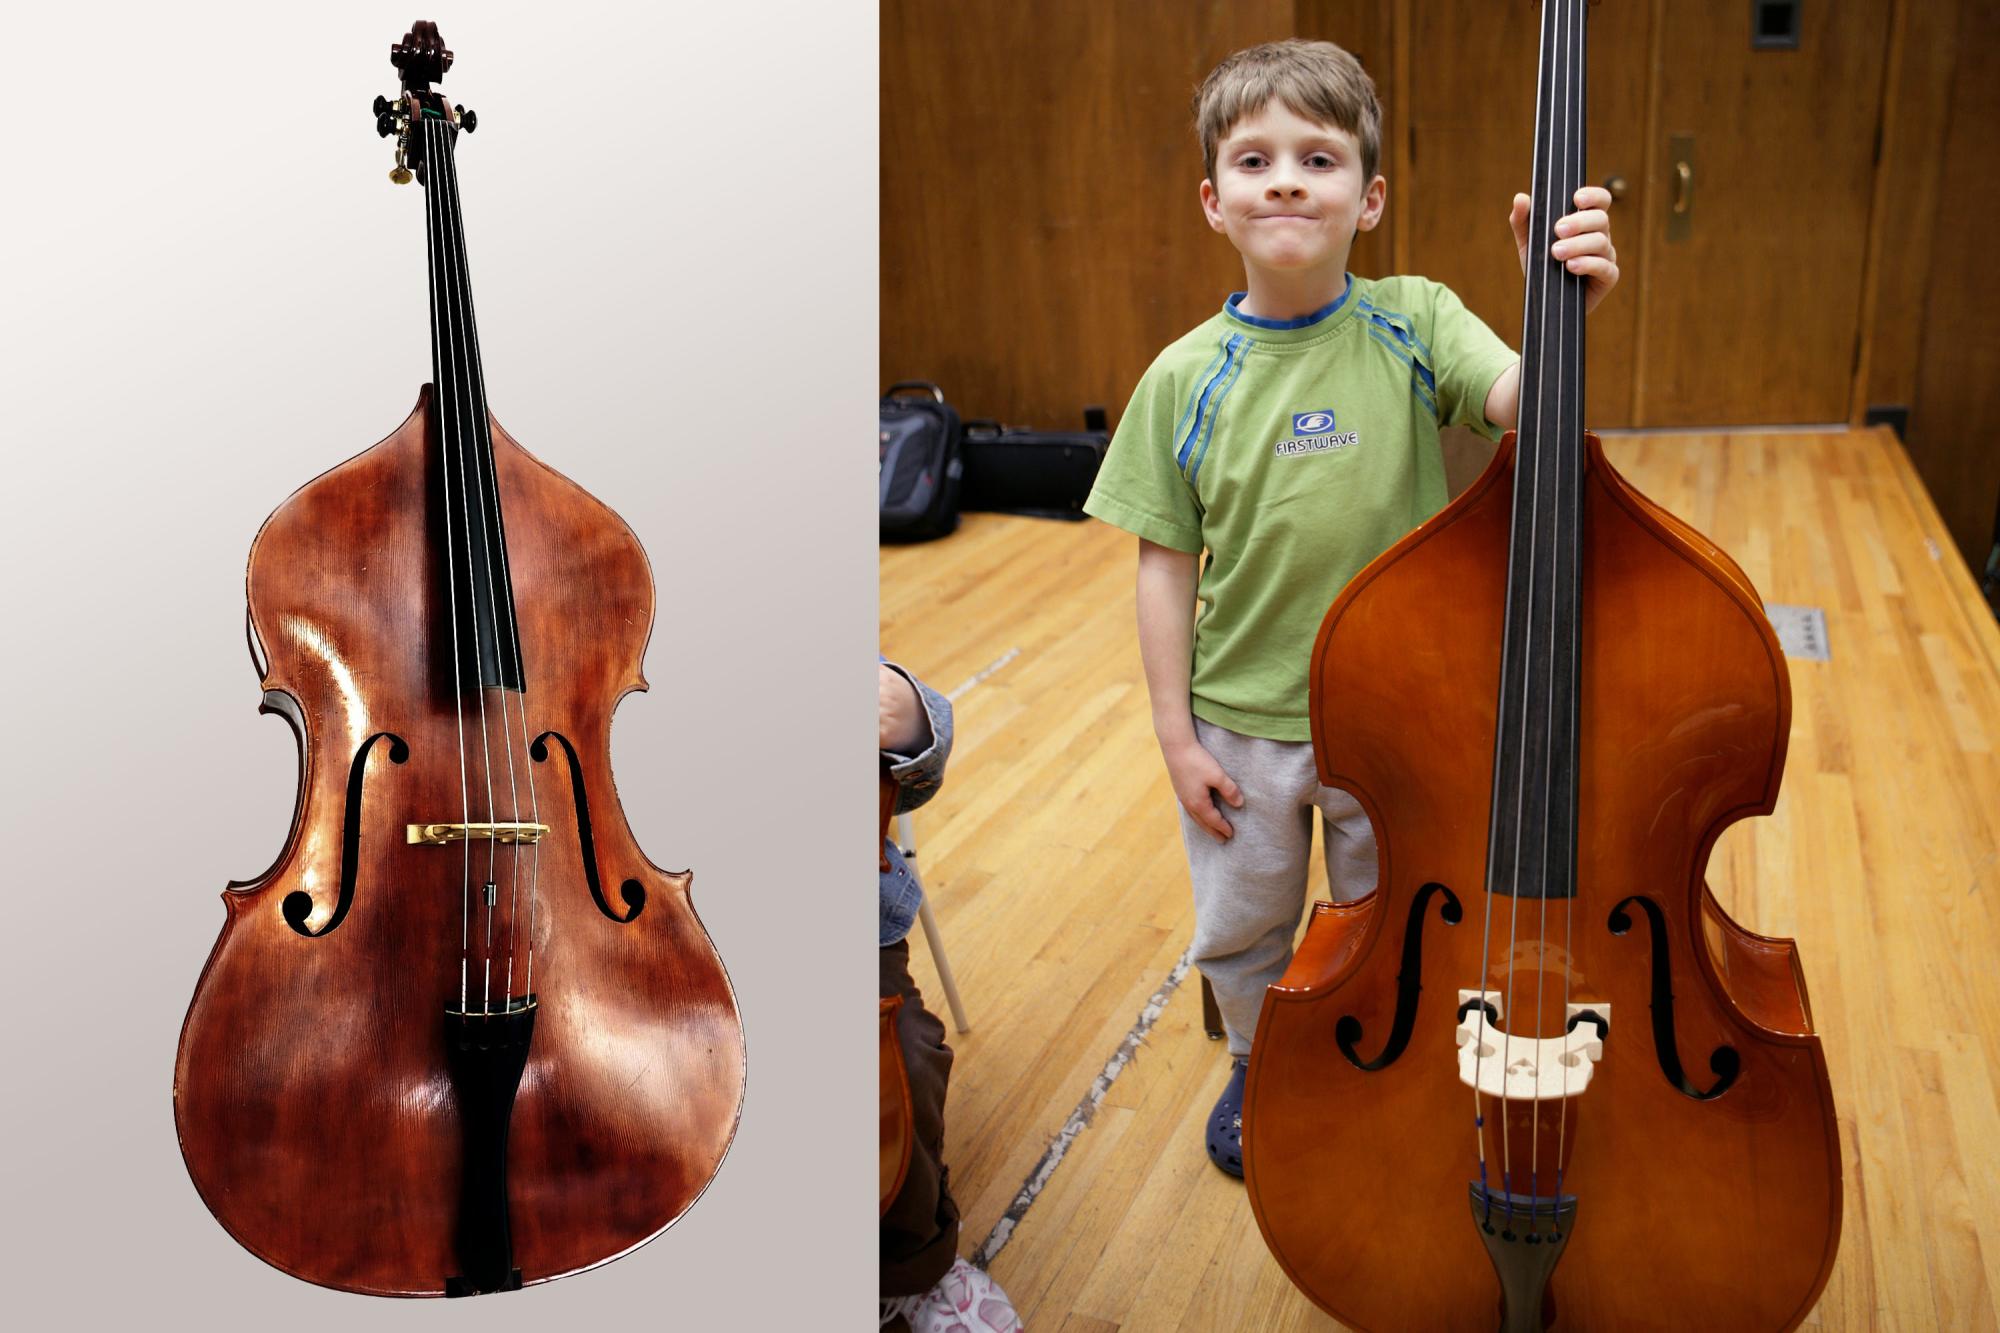 a side-by-side image of a full sized bass and a young child with a small student's bass